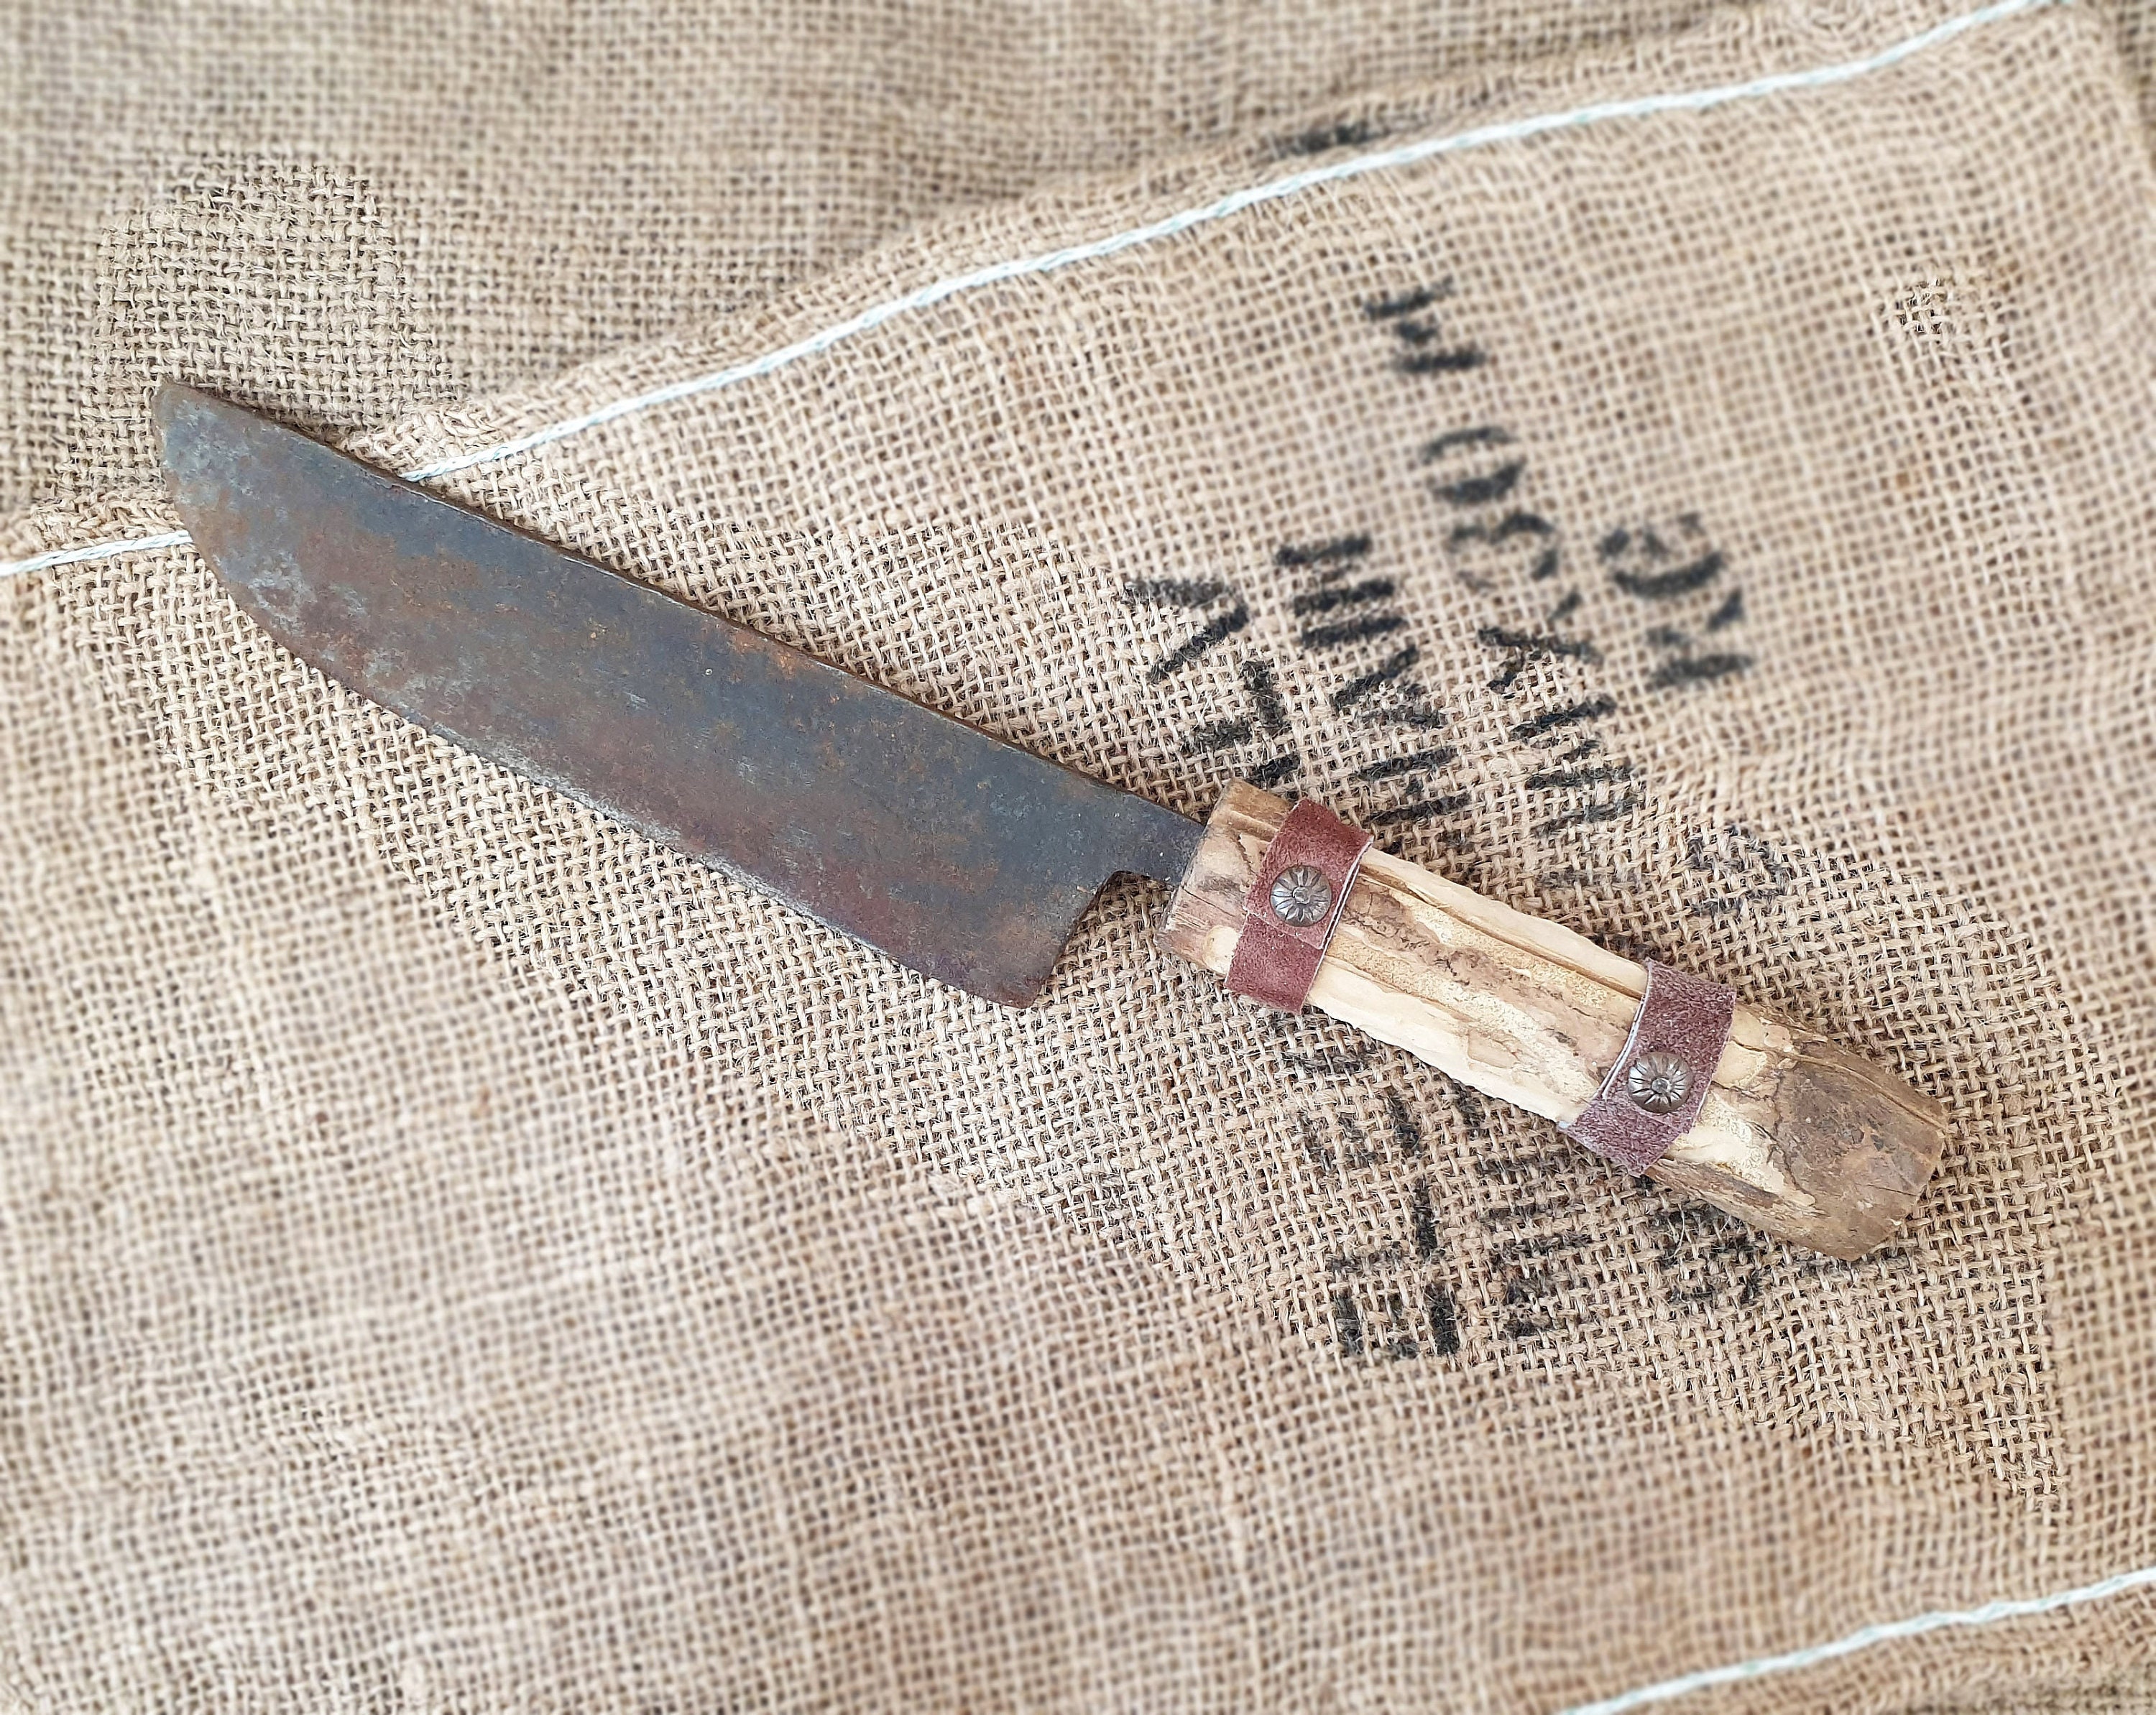 Distressed Antique Serrated Cast Iron, Steel & Wood Hay Knife Rustic  Farmhouse Tool 2646 